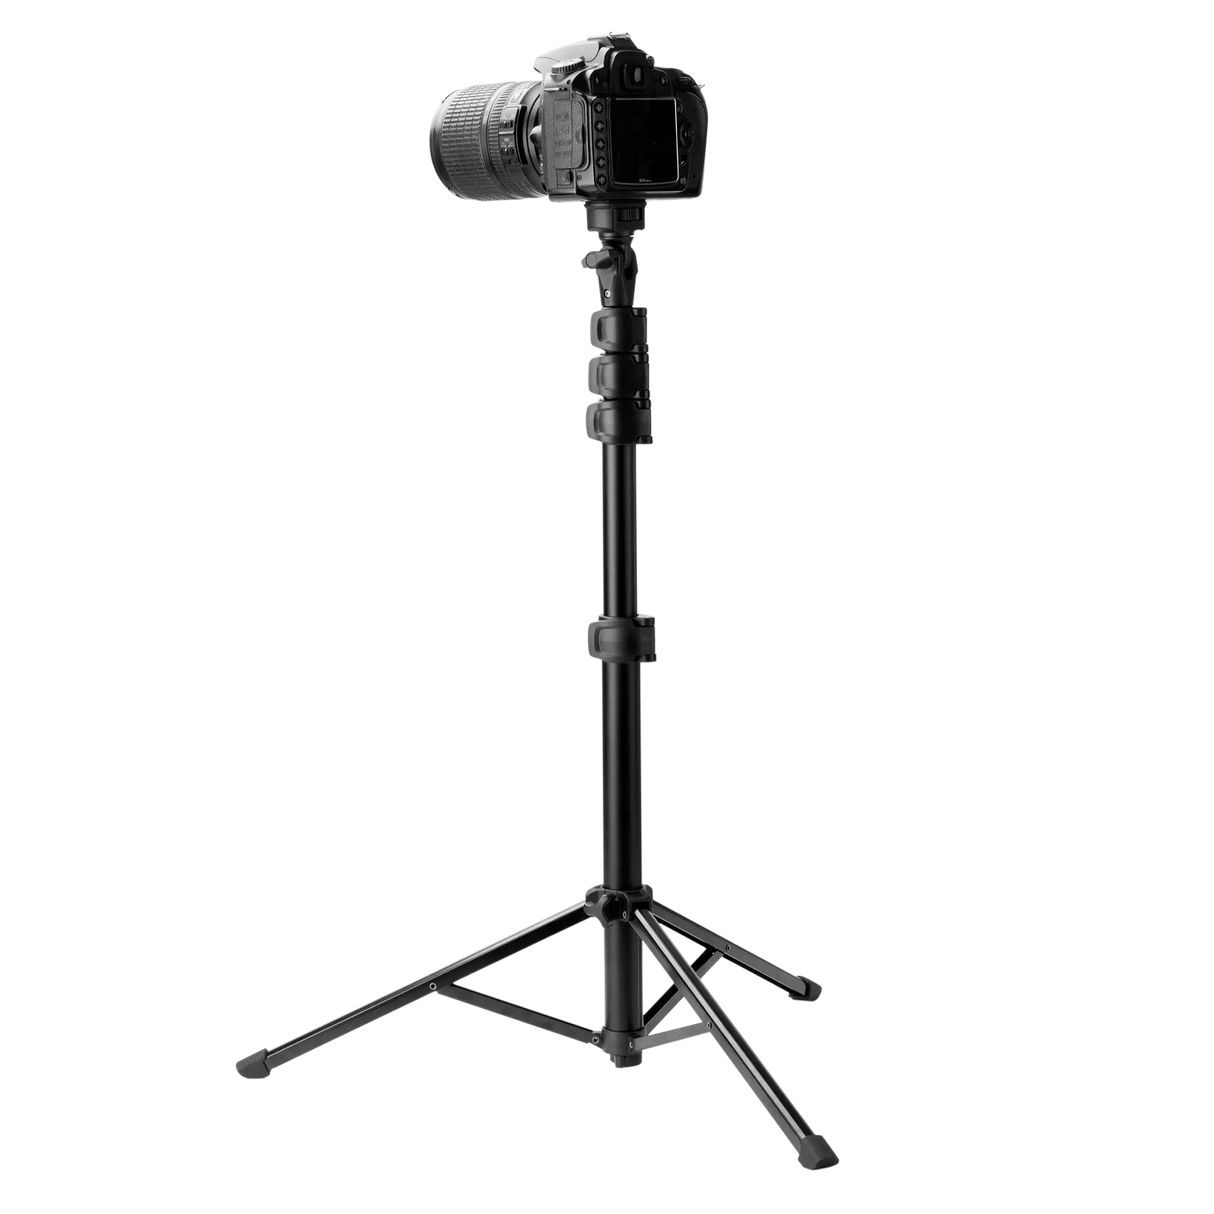 Comfort Max 2 - Live Streaming Tripod – Rollei